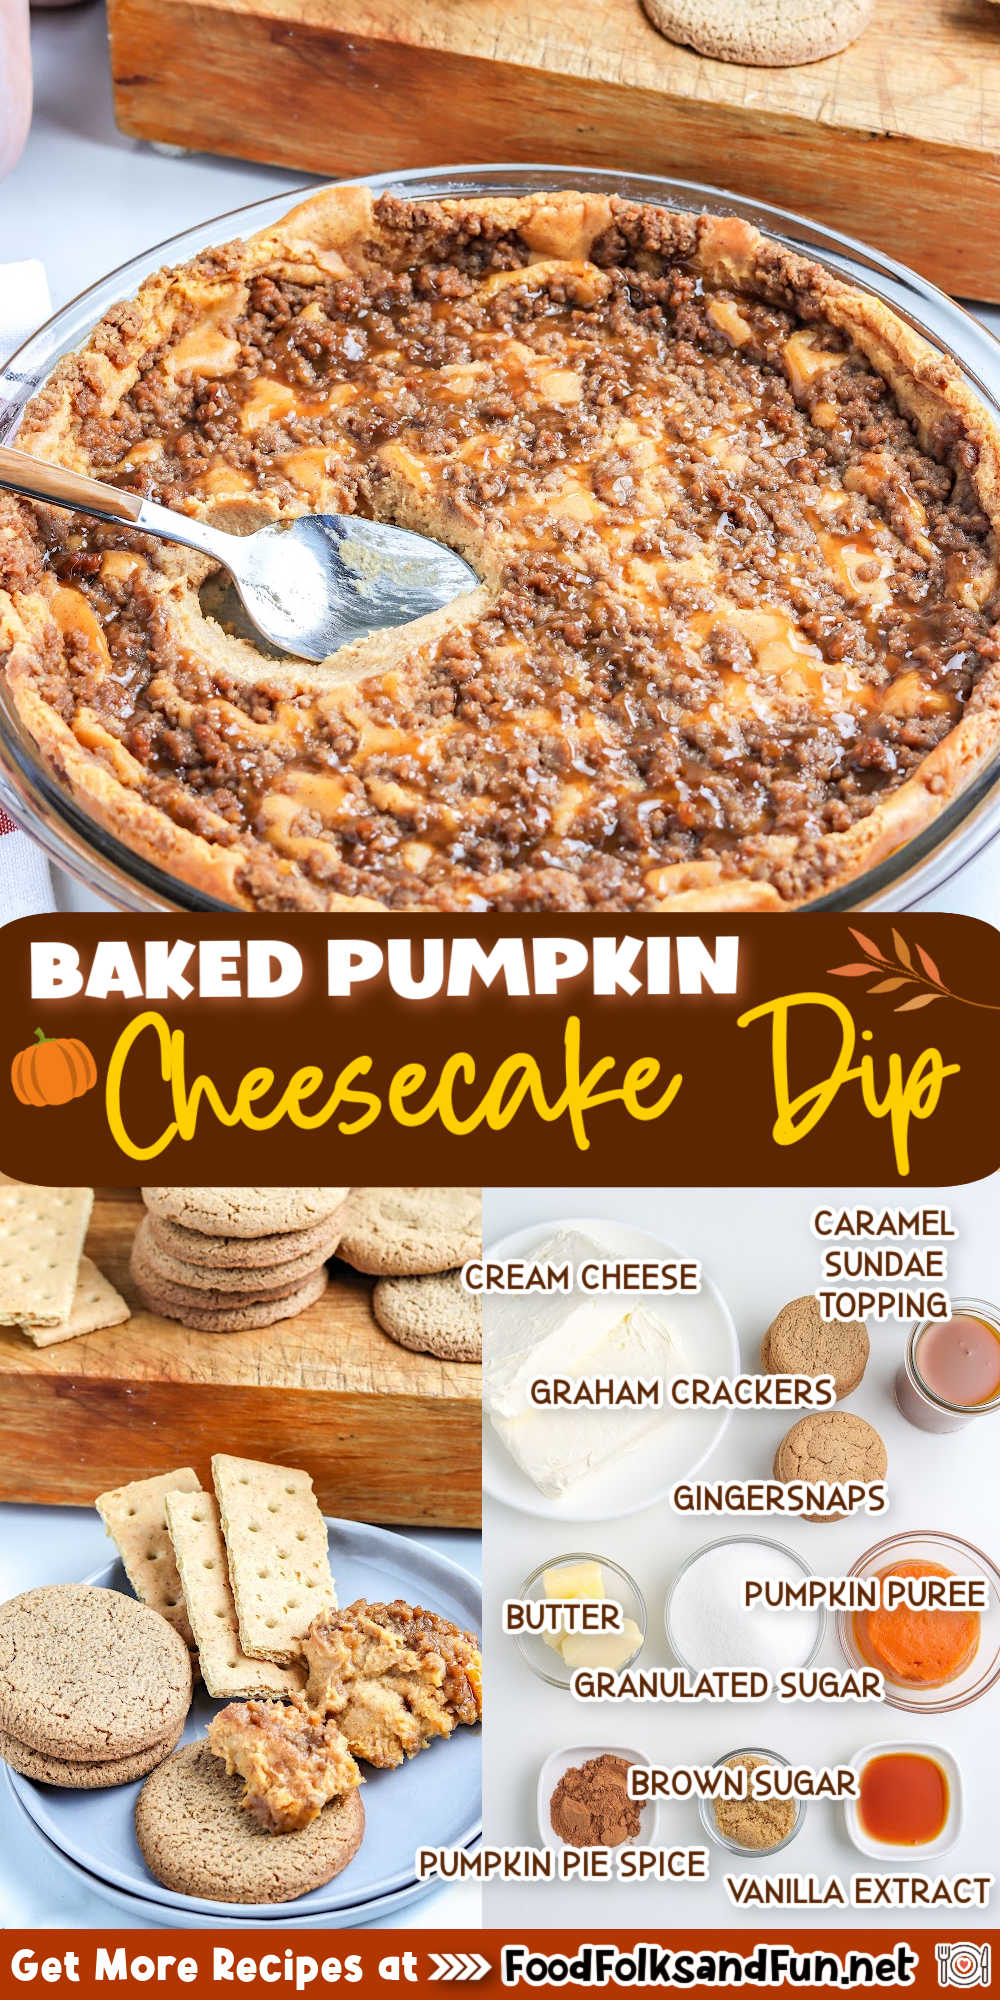 This baked pumpkin cheesecake dip will be your new favorite fall dessert! It’s easy, it’s fast, and it’s not only family-friendly but also loaded with all kinds of autumn flavor.
 via @foodfolksandfun